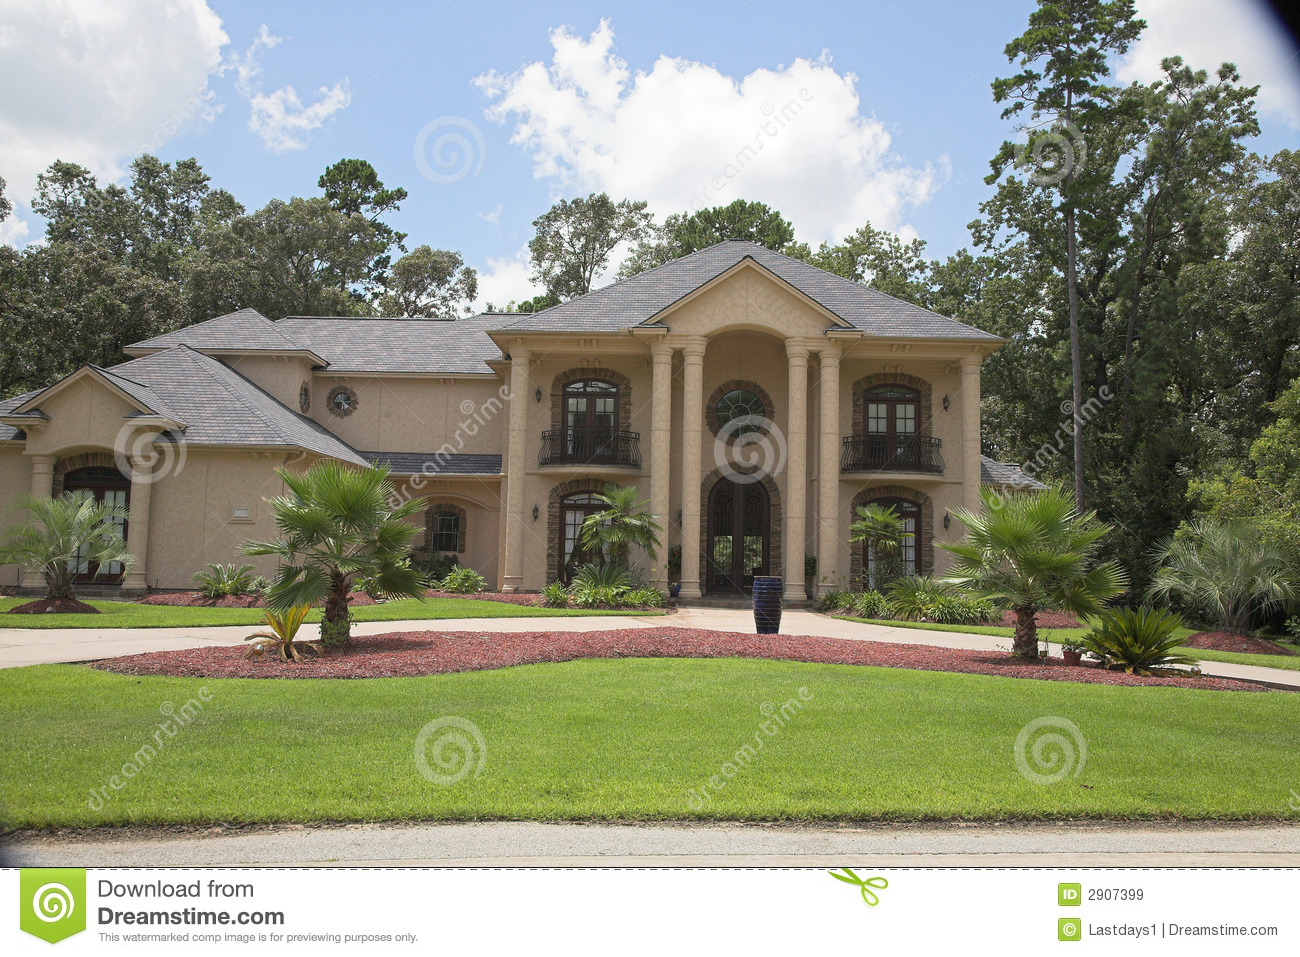 Million Dollar Homes Series Royalty Free Stock Images.